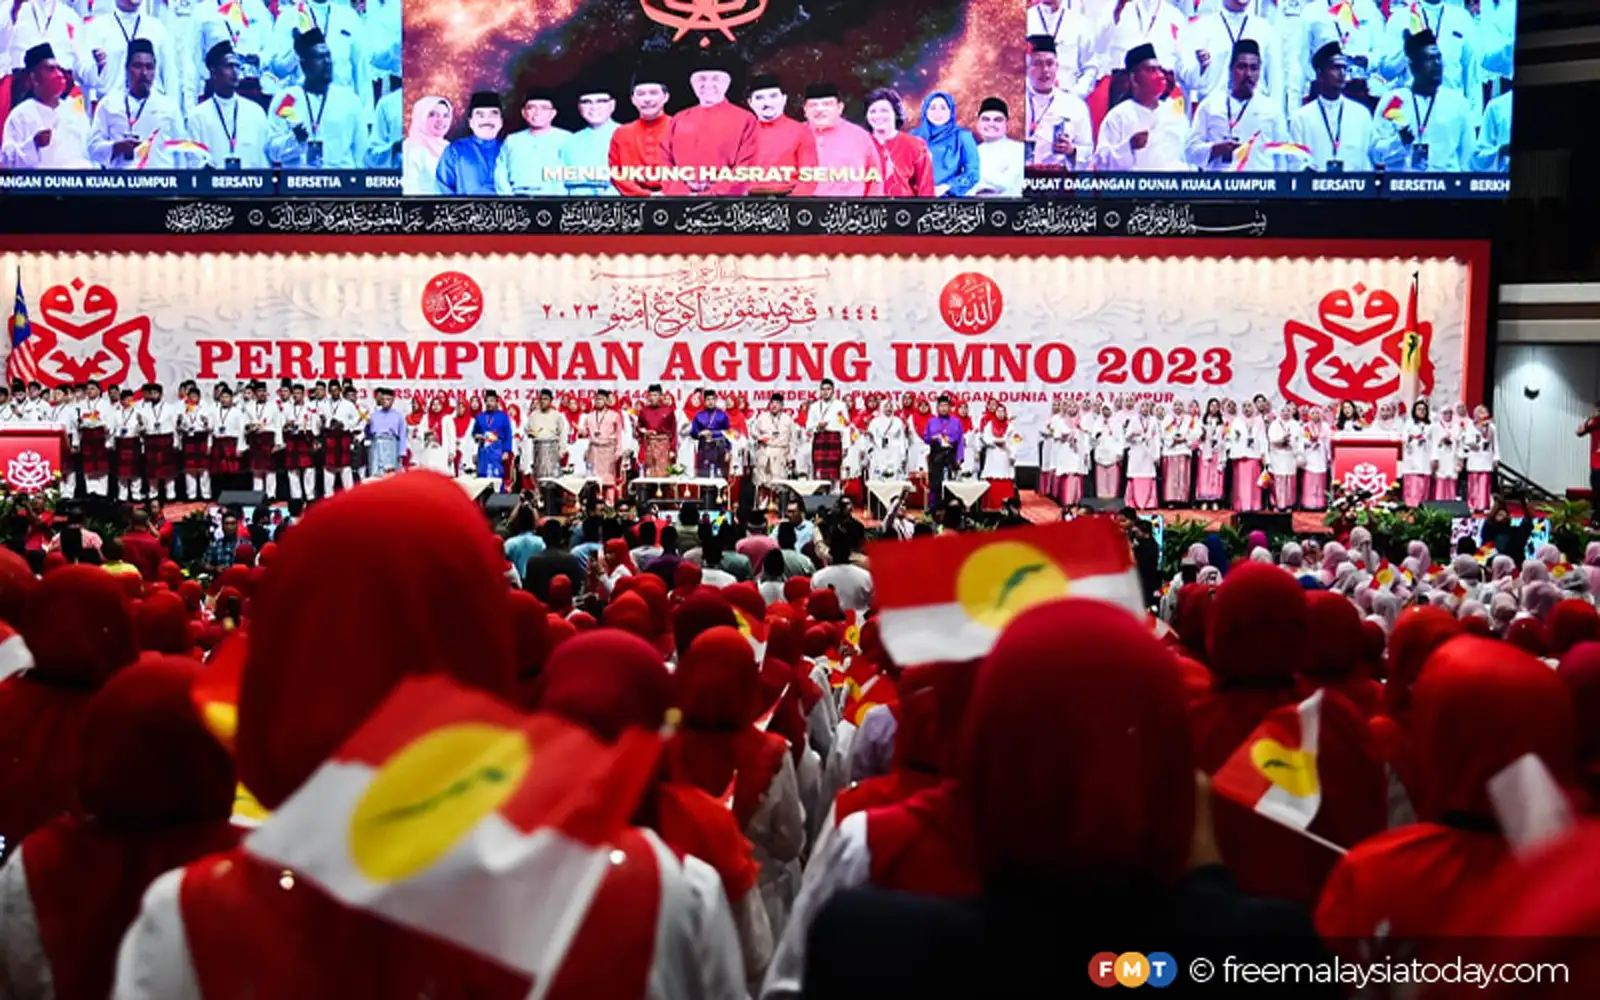 forming alliances post-election a strategic move for sabah umno, says analyst